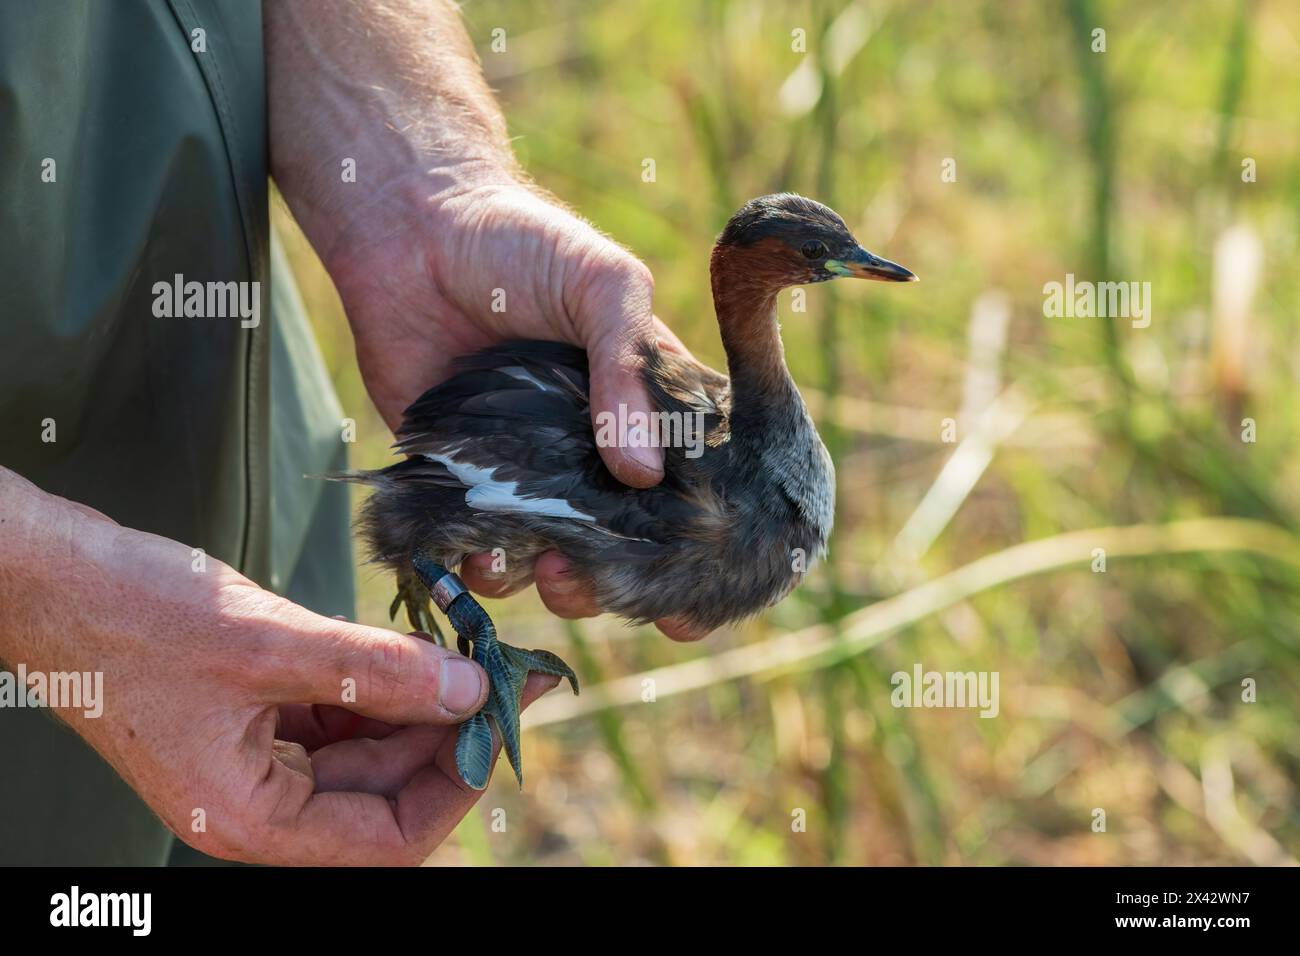 A cute little grebe (Tachybaptus ruficollis) being ringed for research on water birds Stock Photo